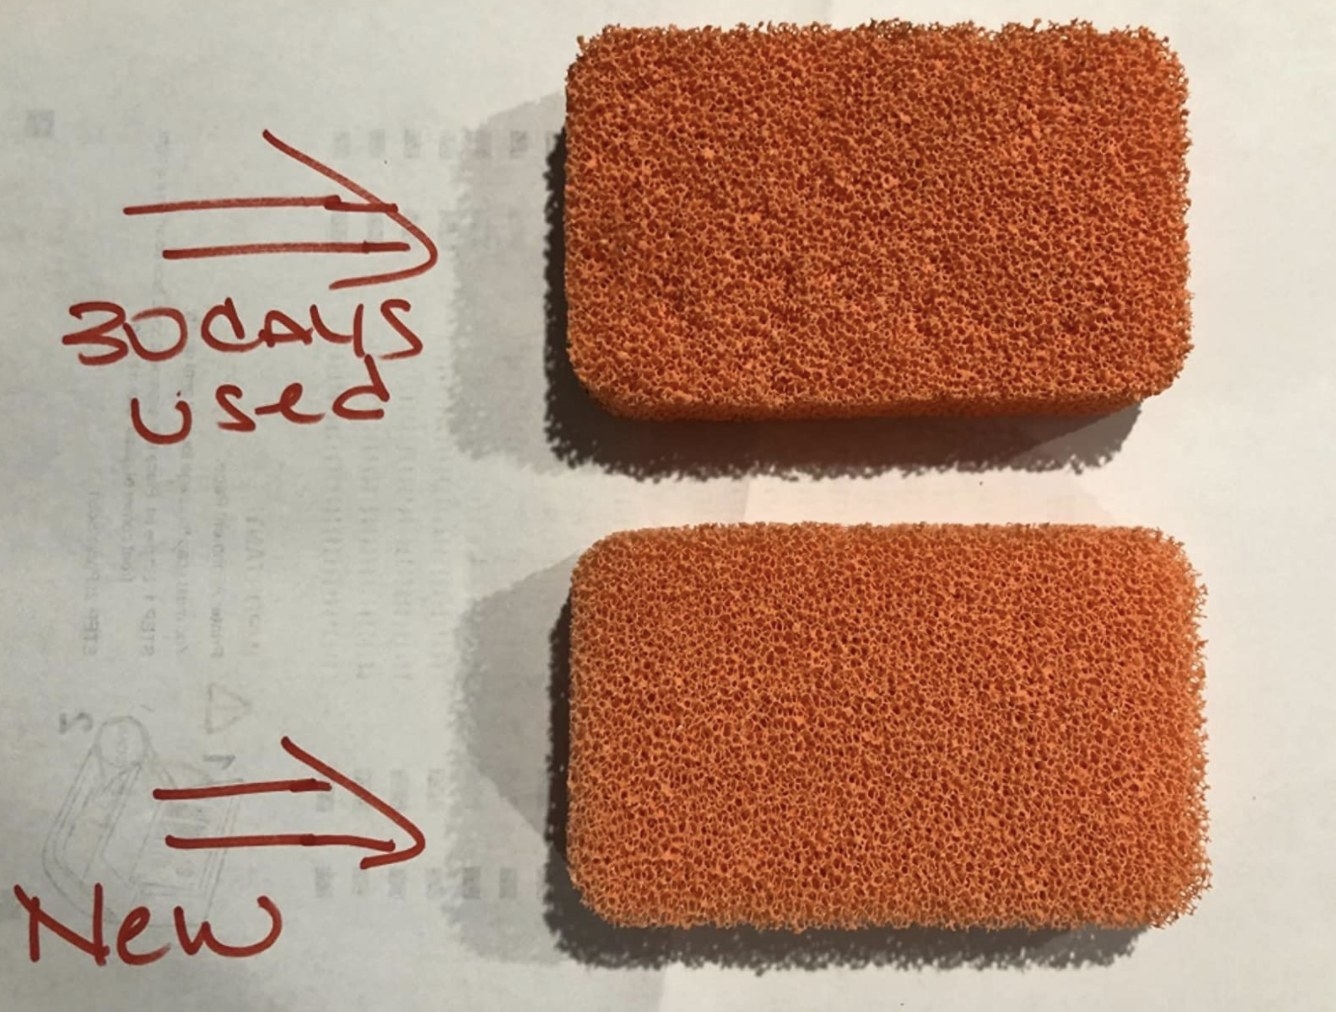 reviewer photo showing their sponge after 30 days of use compared to a new one, and they both look nearly the same